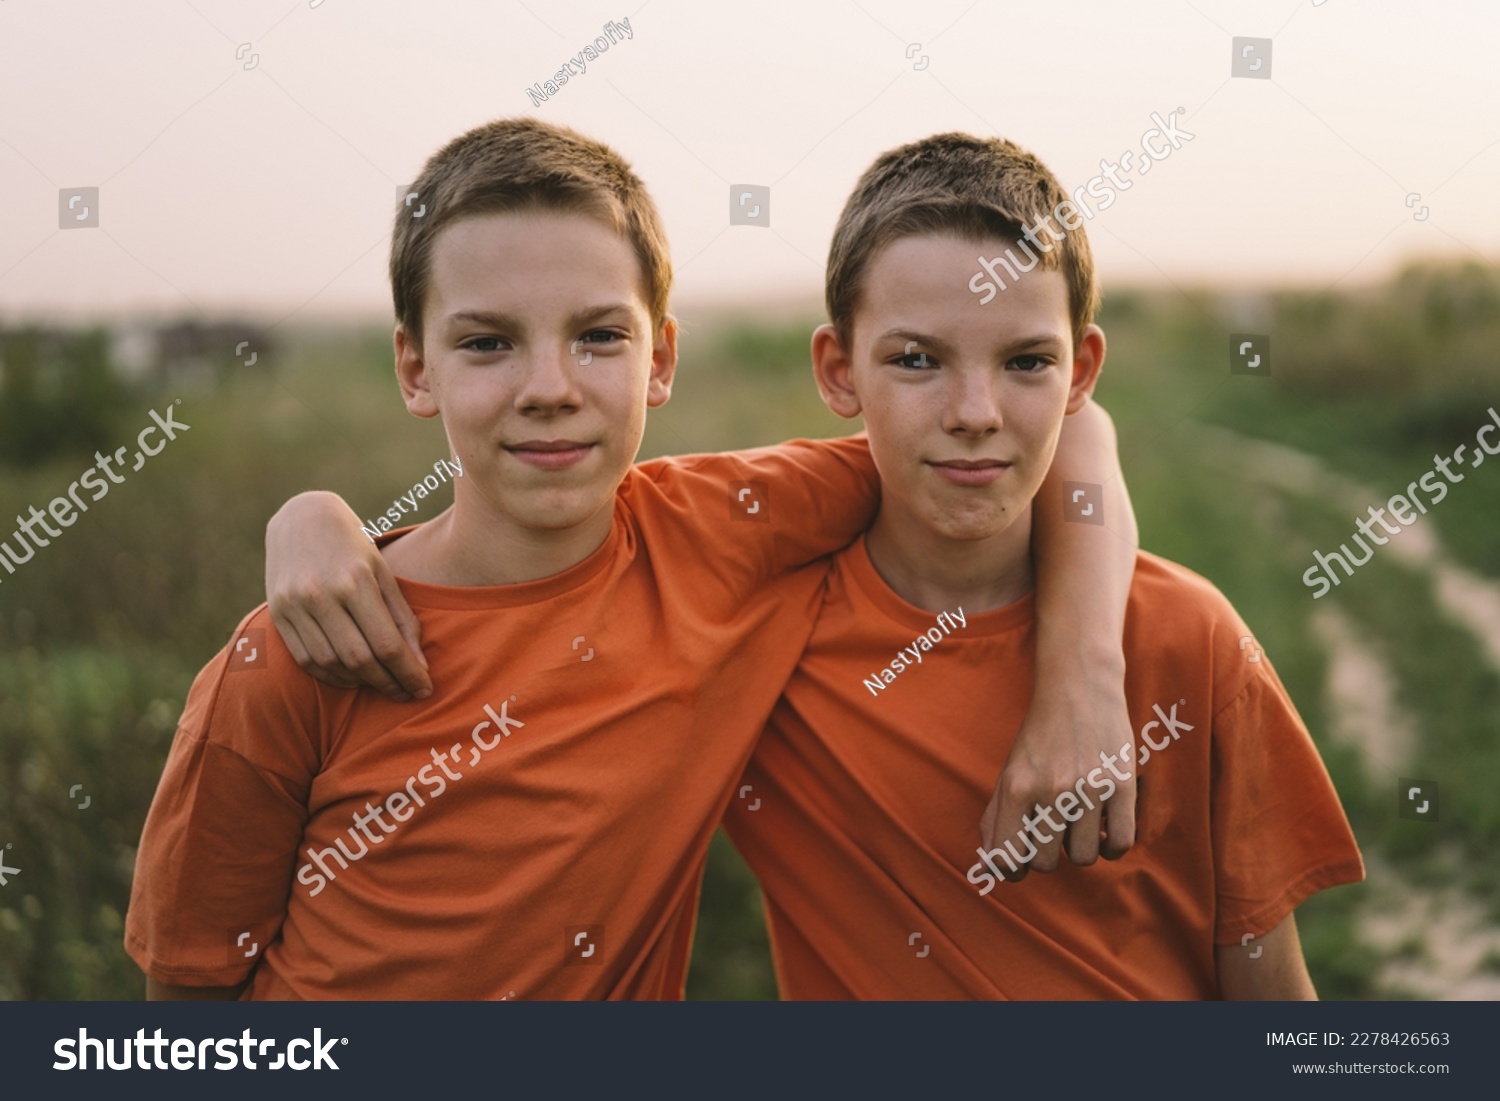 Funny twin brother boys in orange t-shirt playing outdoors on field at sunset. Happy children, lifestyle. #2278426563